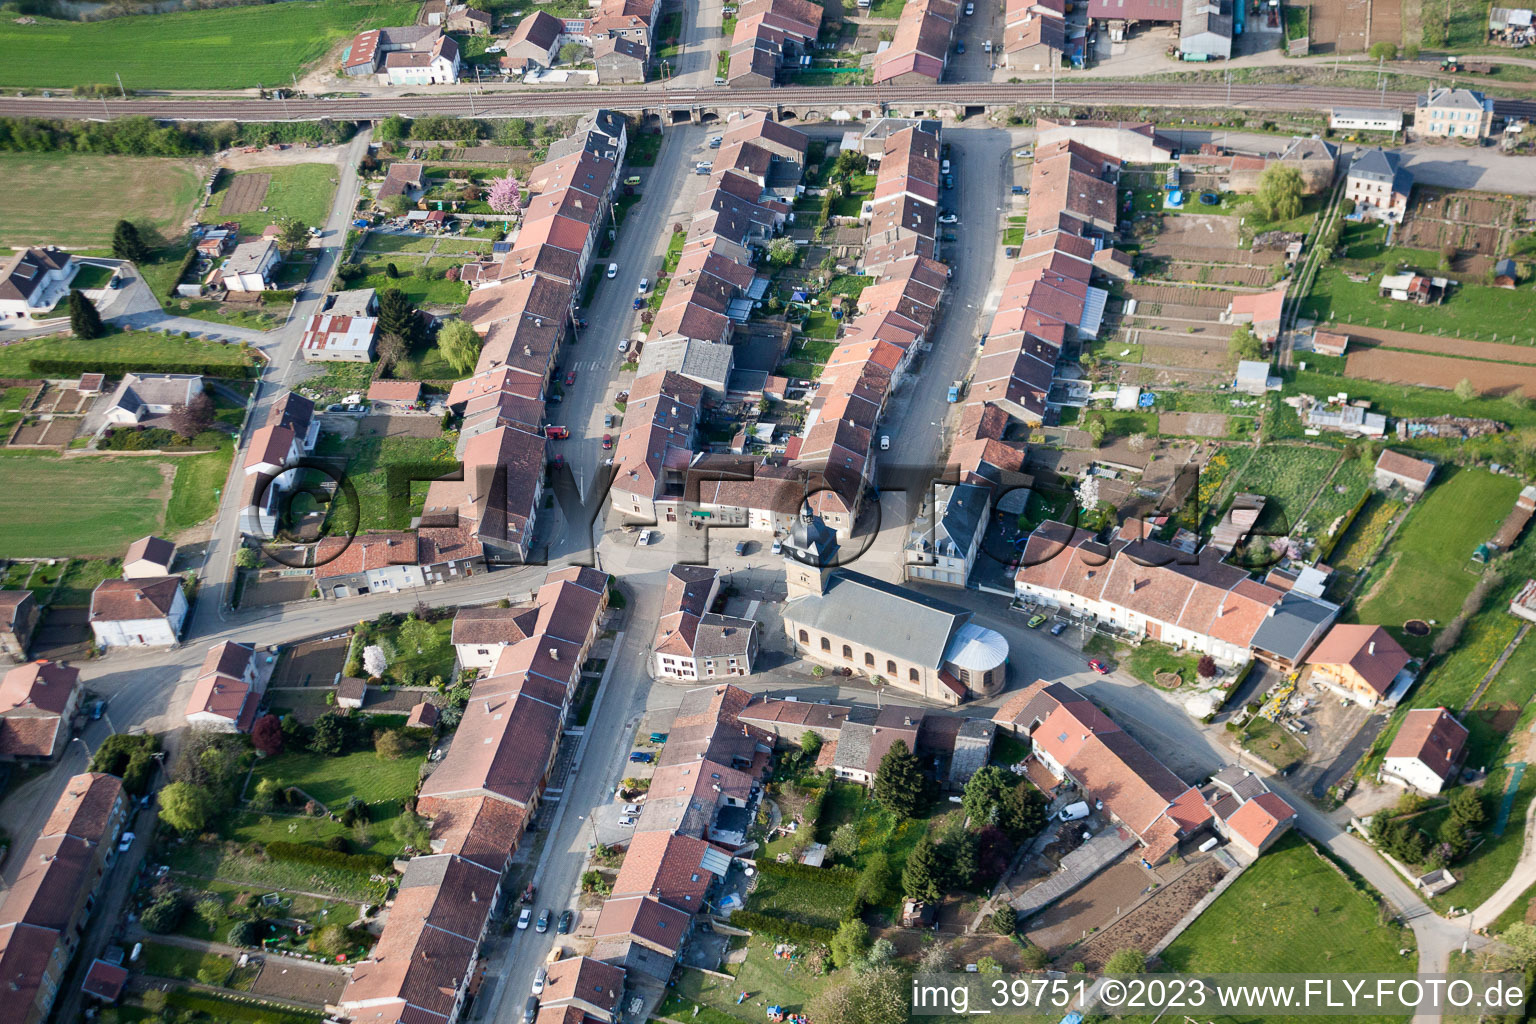 Aerial photograpy of Charency-Vezin in the state Meurthe et Moselle, France